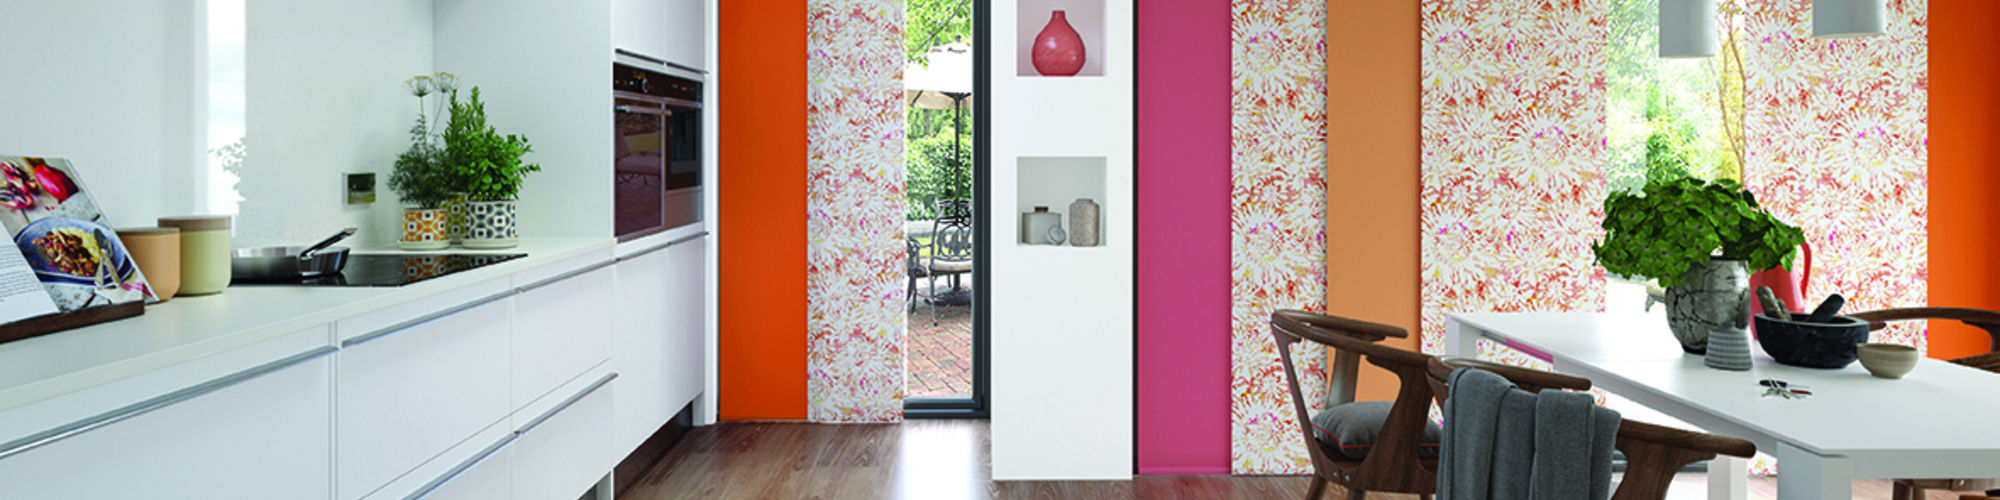 Panel Blinds from Blind Revolution, like these colourful floral patterned ones, are the ideal solution for large windows.